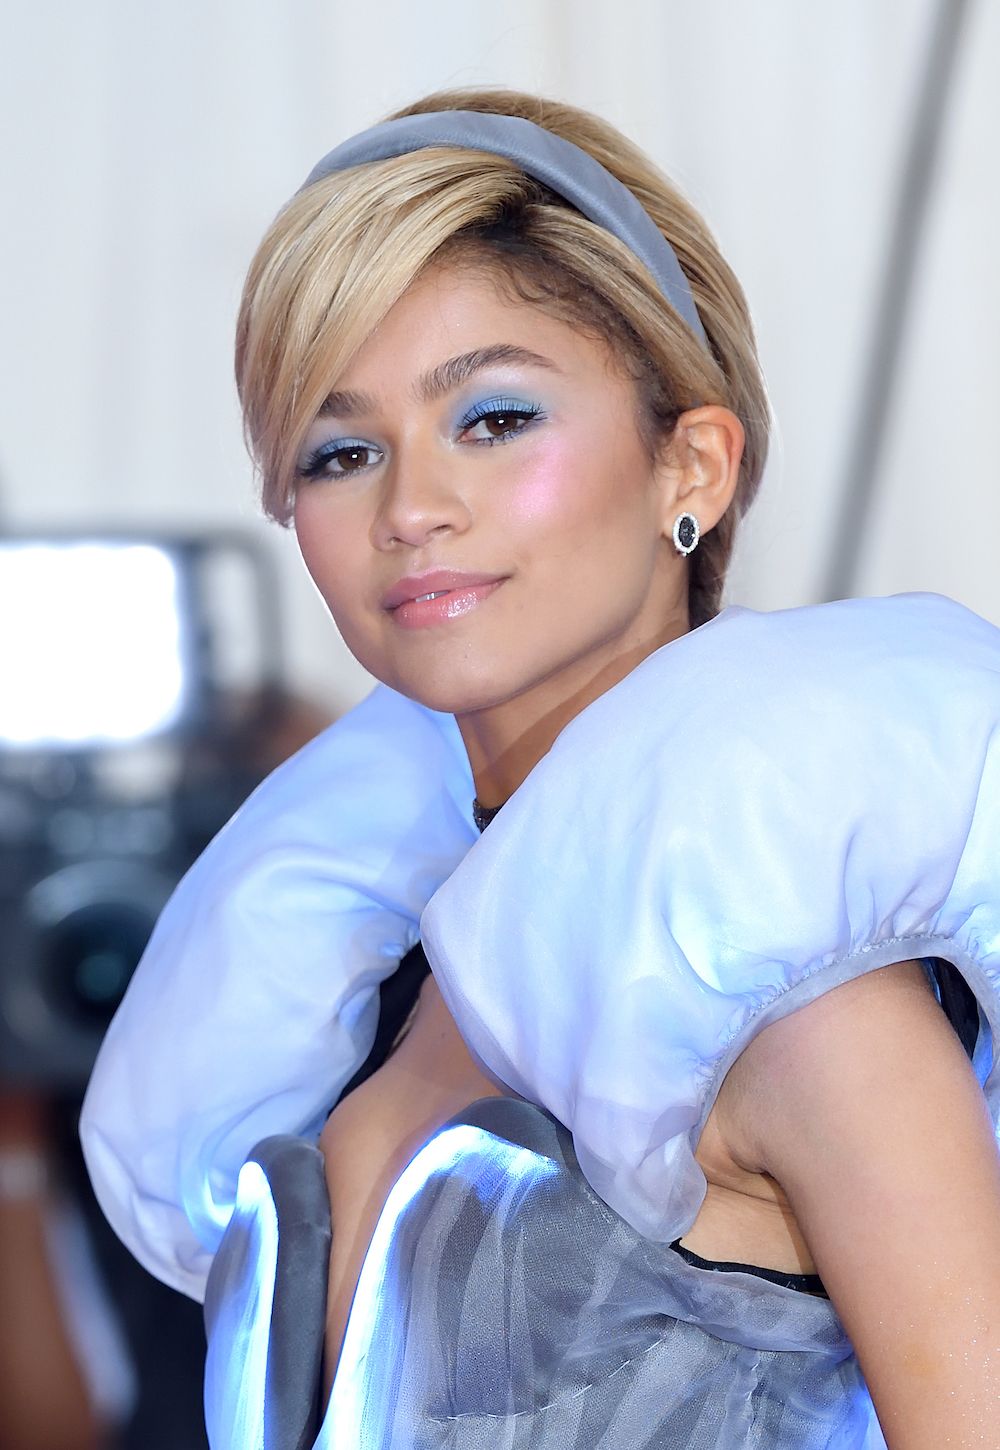 <p>                     Another super memorable creation seen on the Met Gala red carpet was Zendaya’s Cinderella-inspired look from the 2019 event. The star’s makeup made for a truly cohesive ensemble, with pink highlighter and pastel blue eyeshadow to match her ball gown.                   </p>